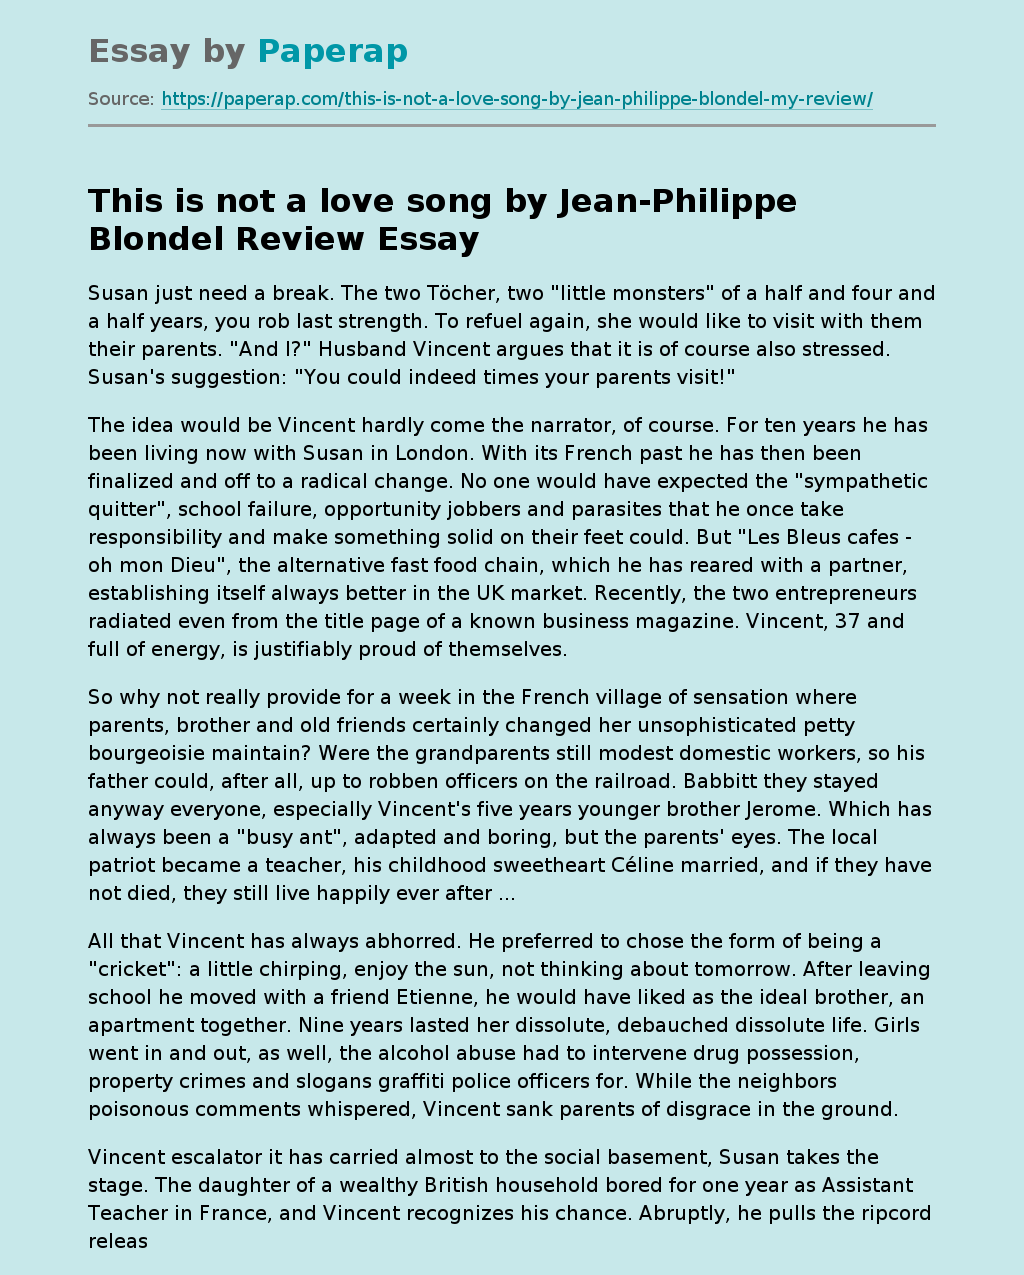 This is not a love song by Jean-Philippe Blondel Review